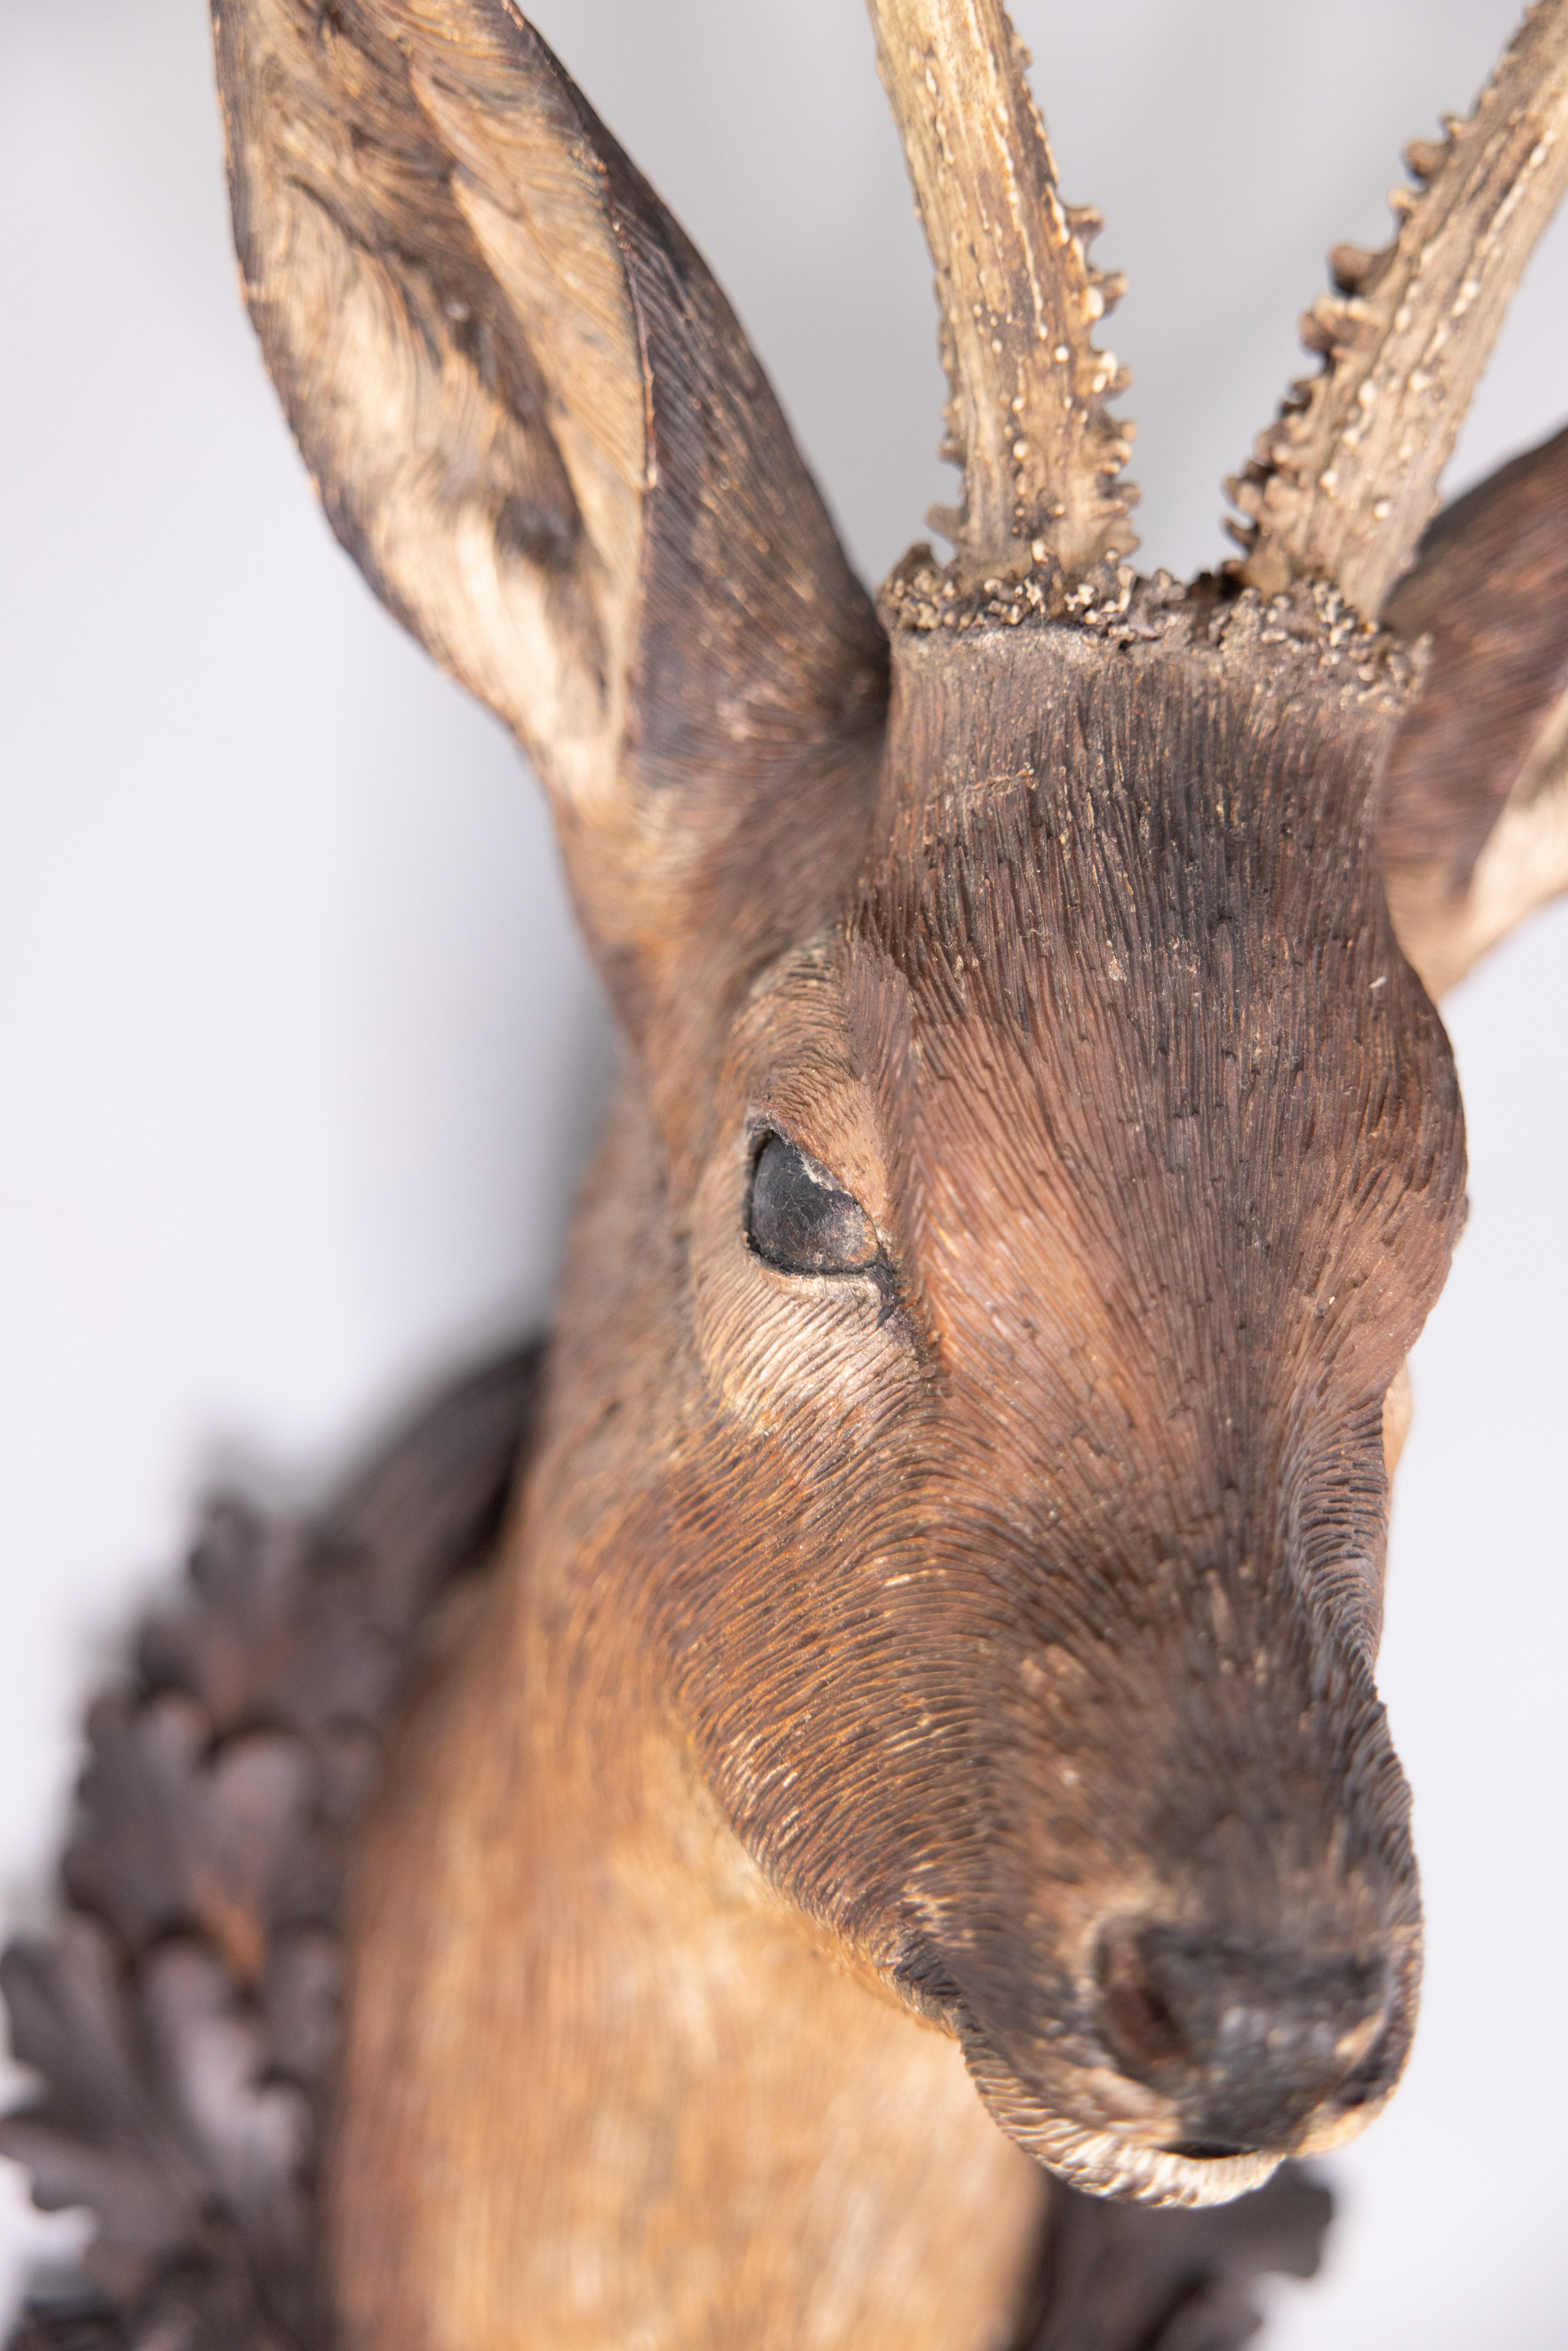 19th Century Black Forest Carved Stag Deer Head With Real Antlers Trophy Mount Plaque 1885